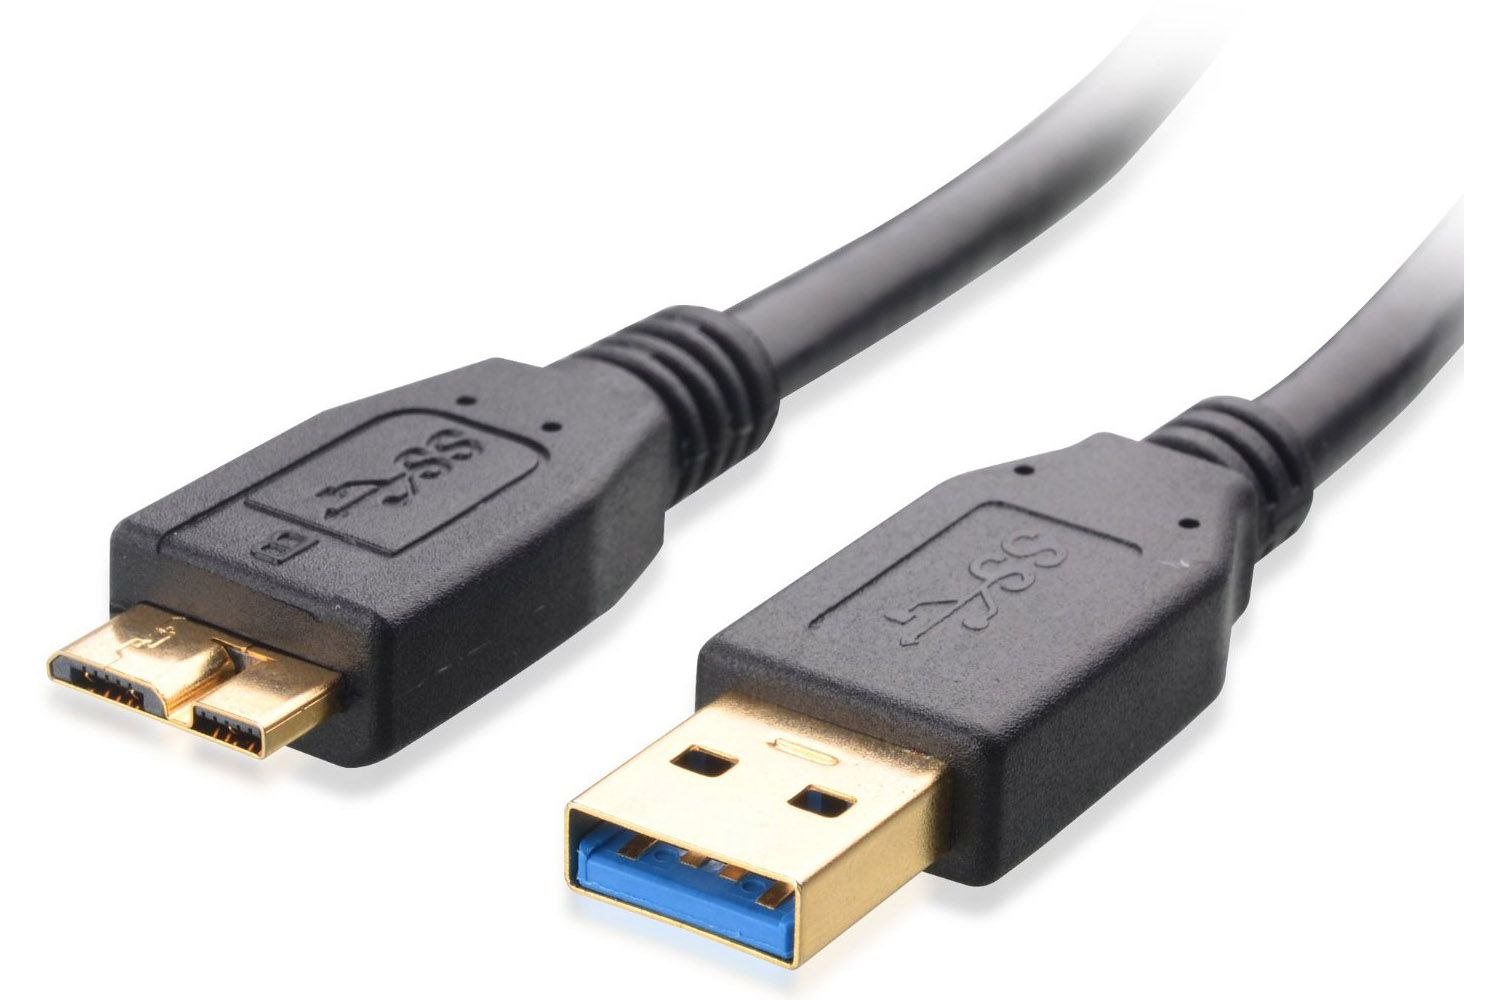 Usb 3.3. Кабель юсб 3.0. Разъем юсб 3.0. USB 1.0. USB 3.0 Cable Micro-b to Type a.